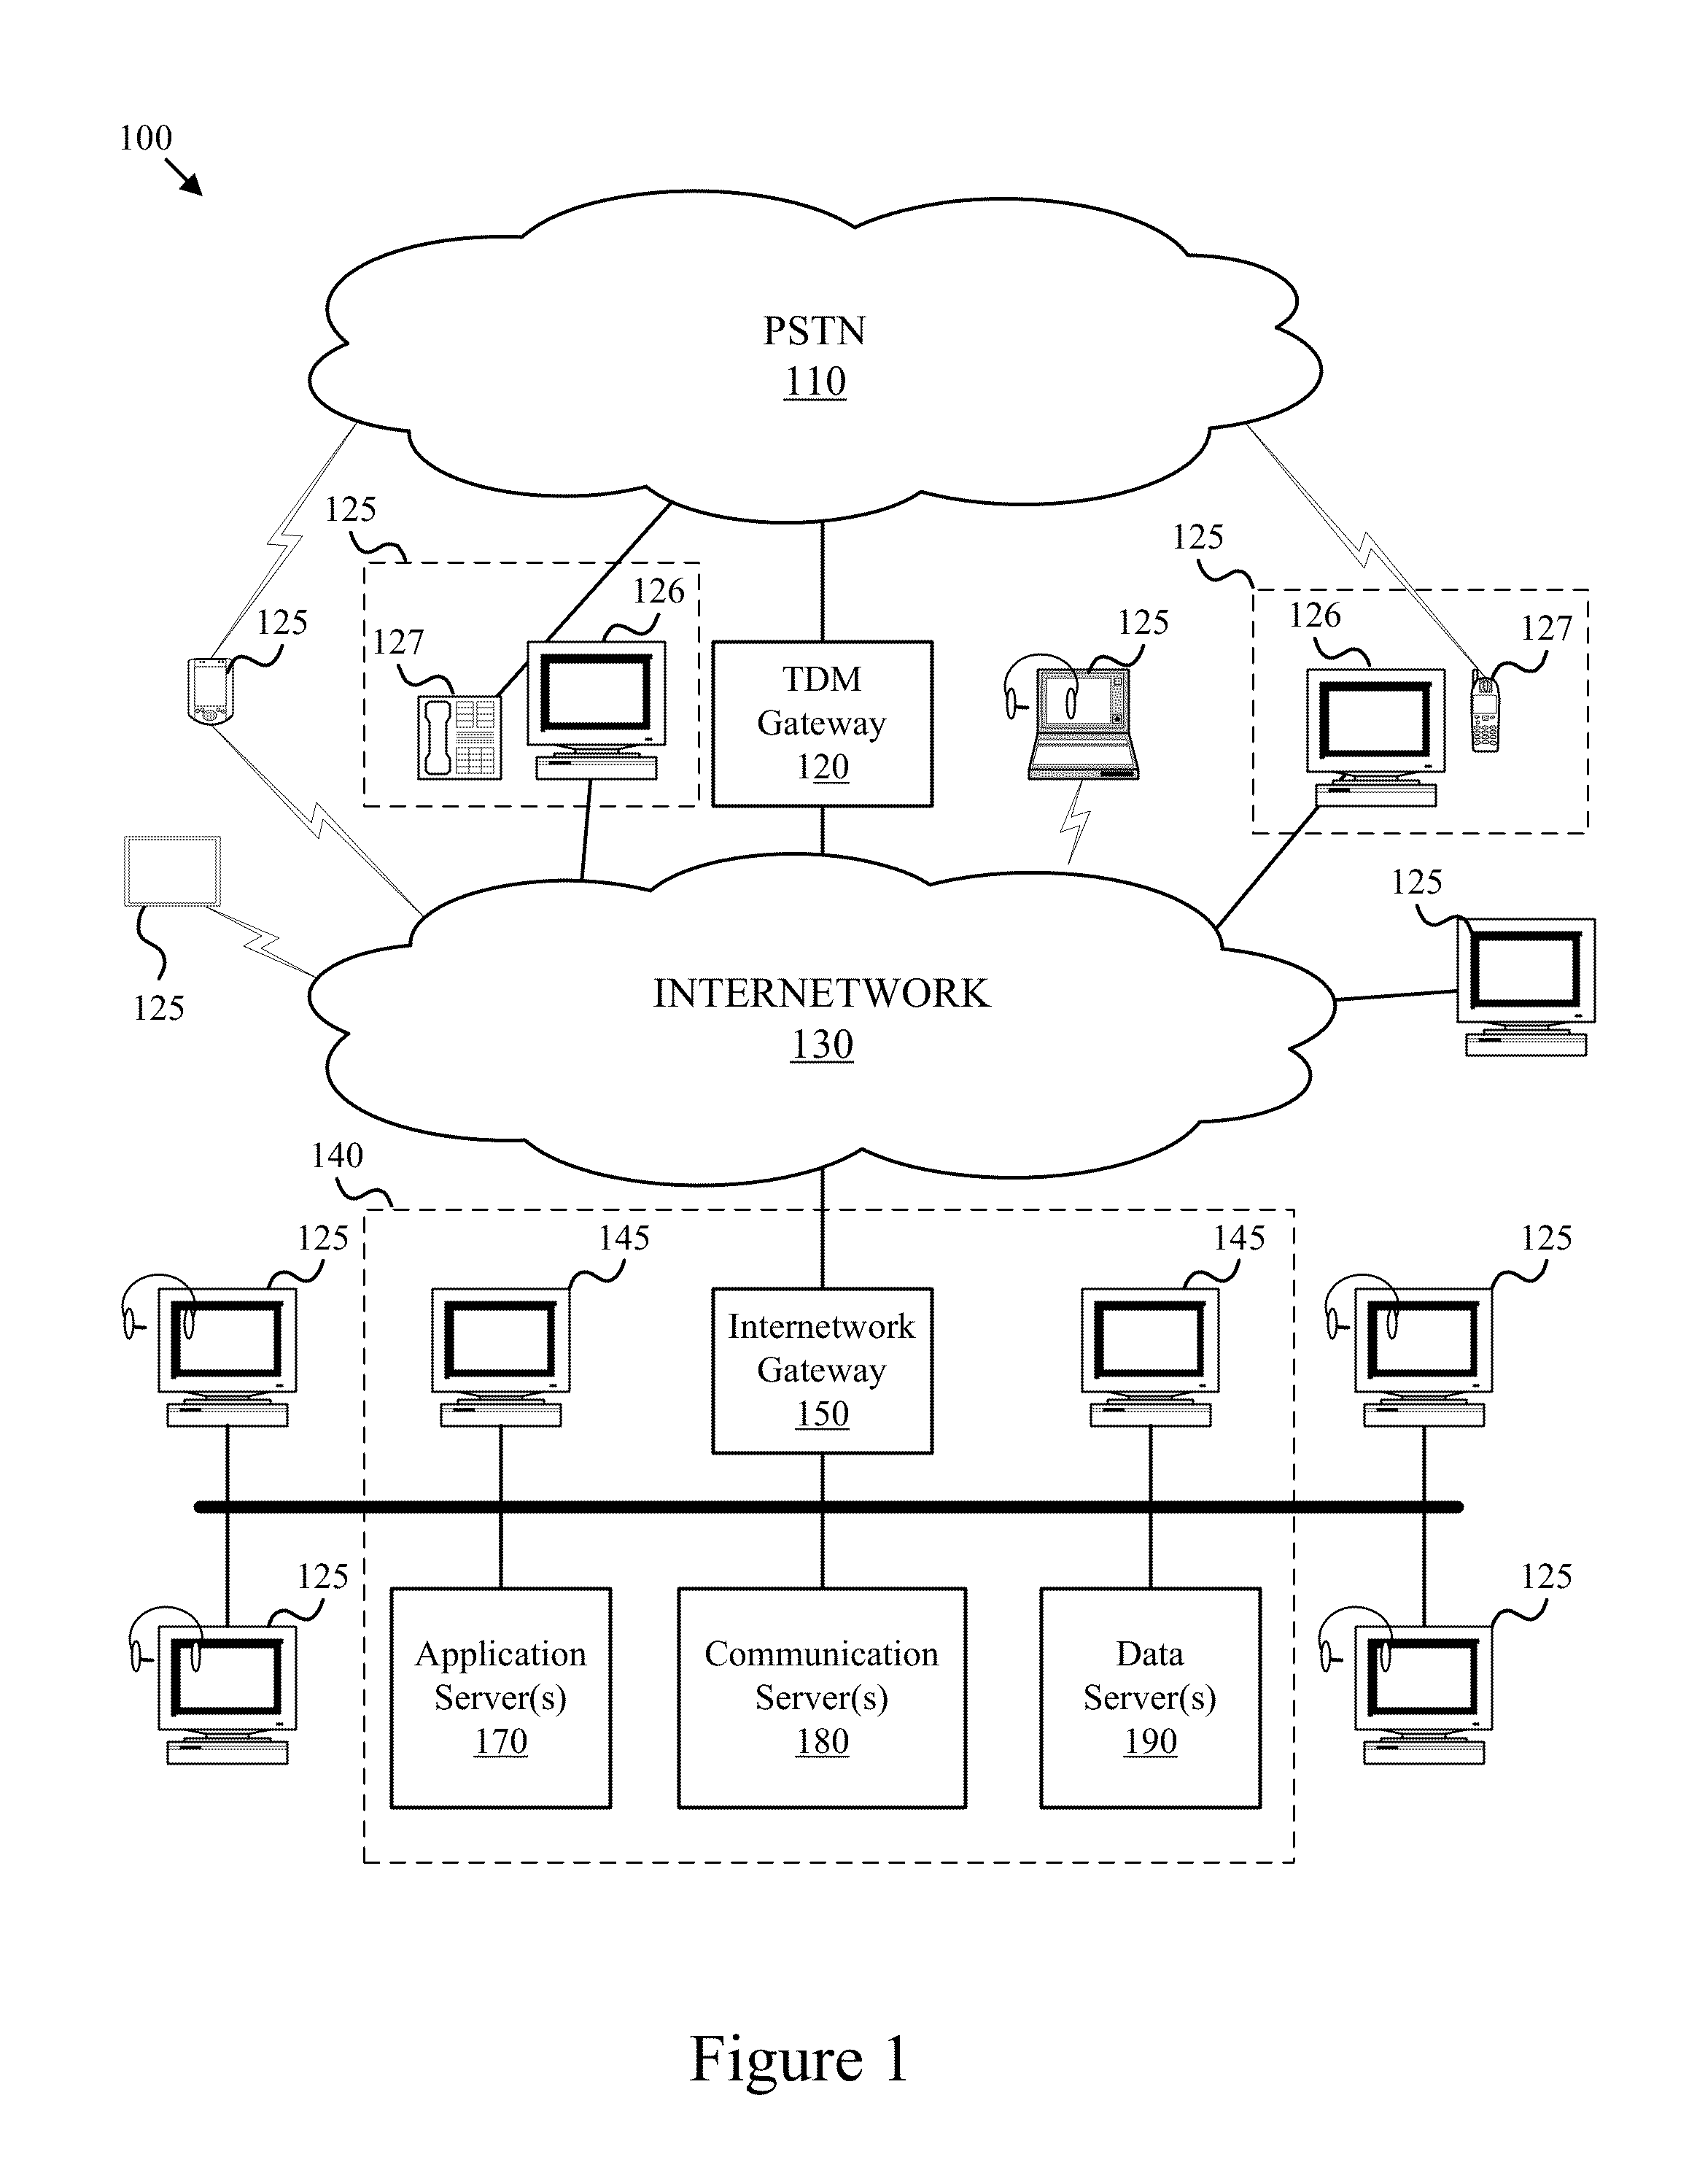 System and methods for multi-user cax editing conflict management